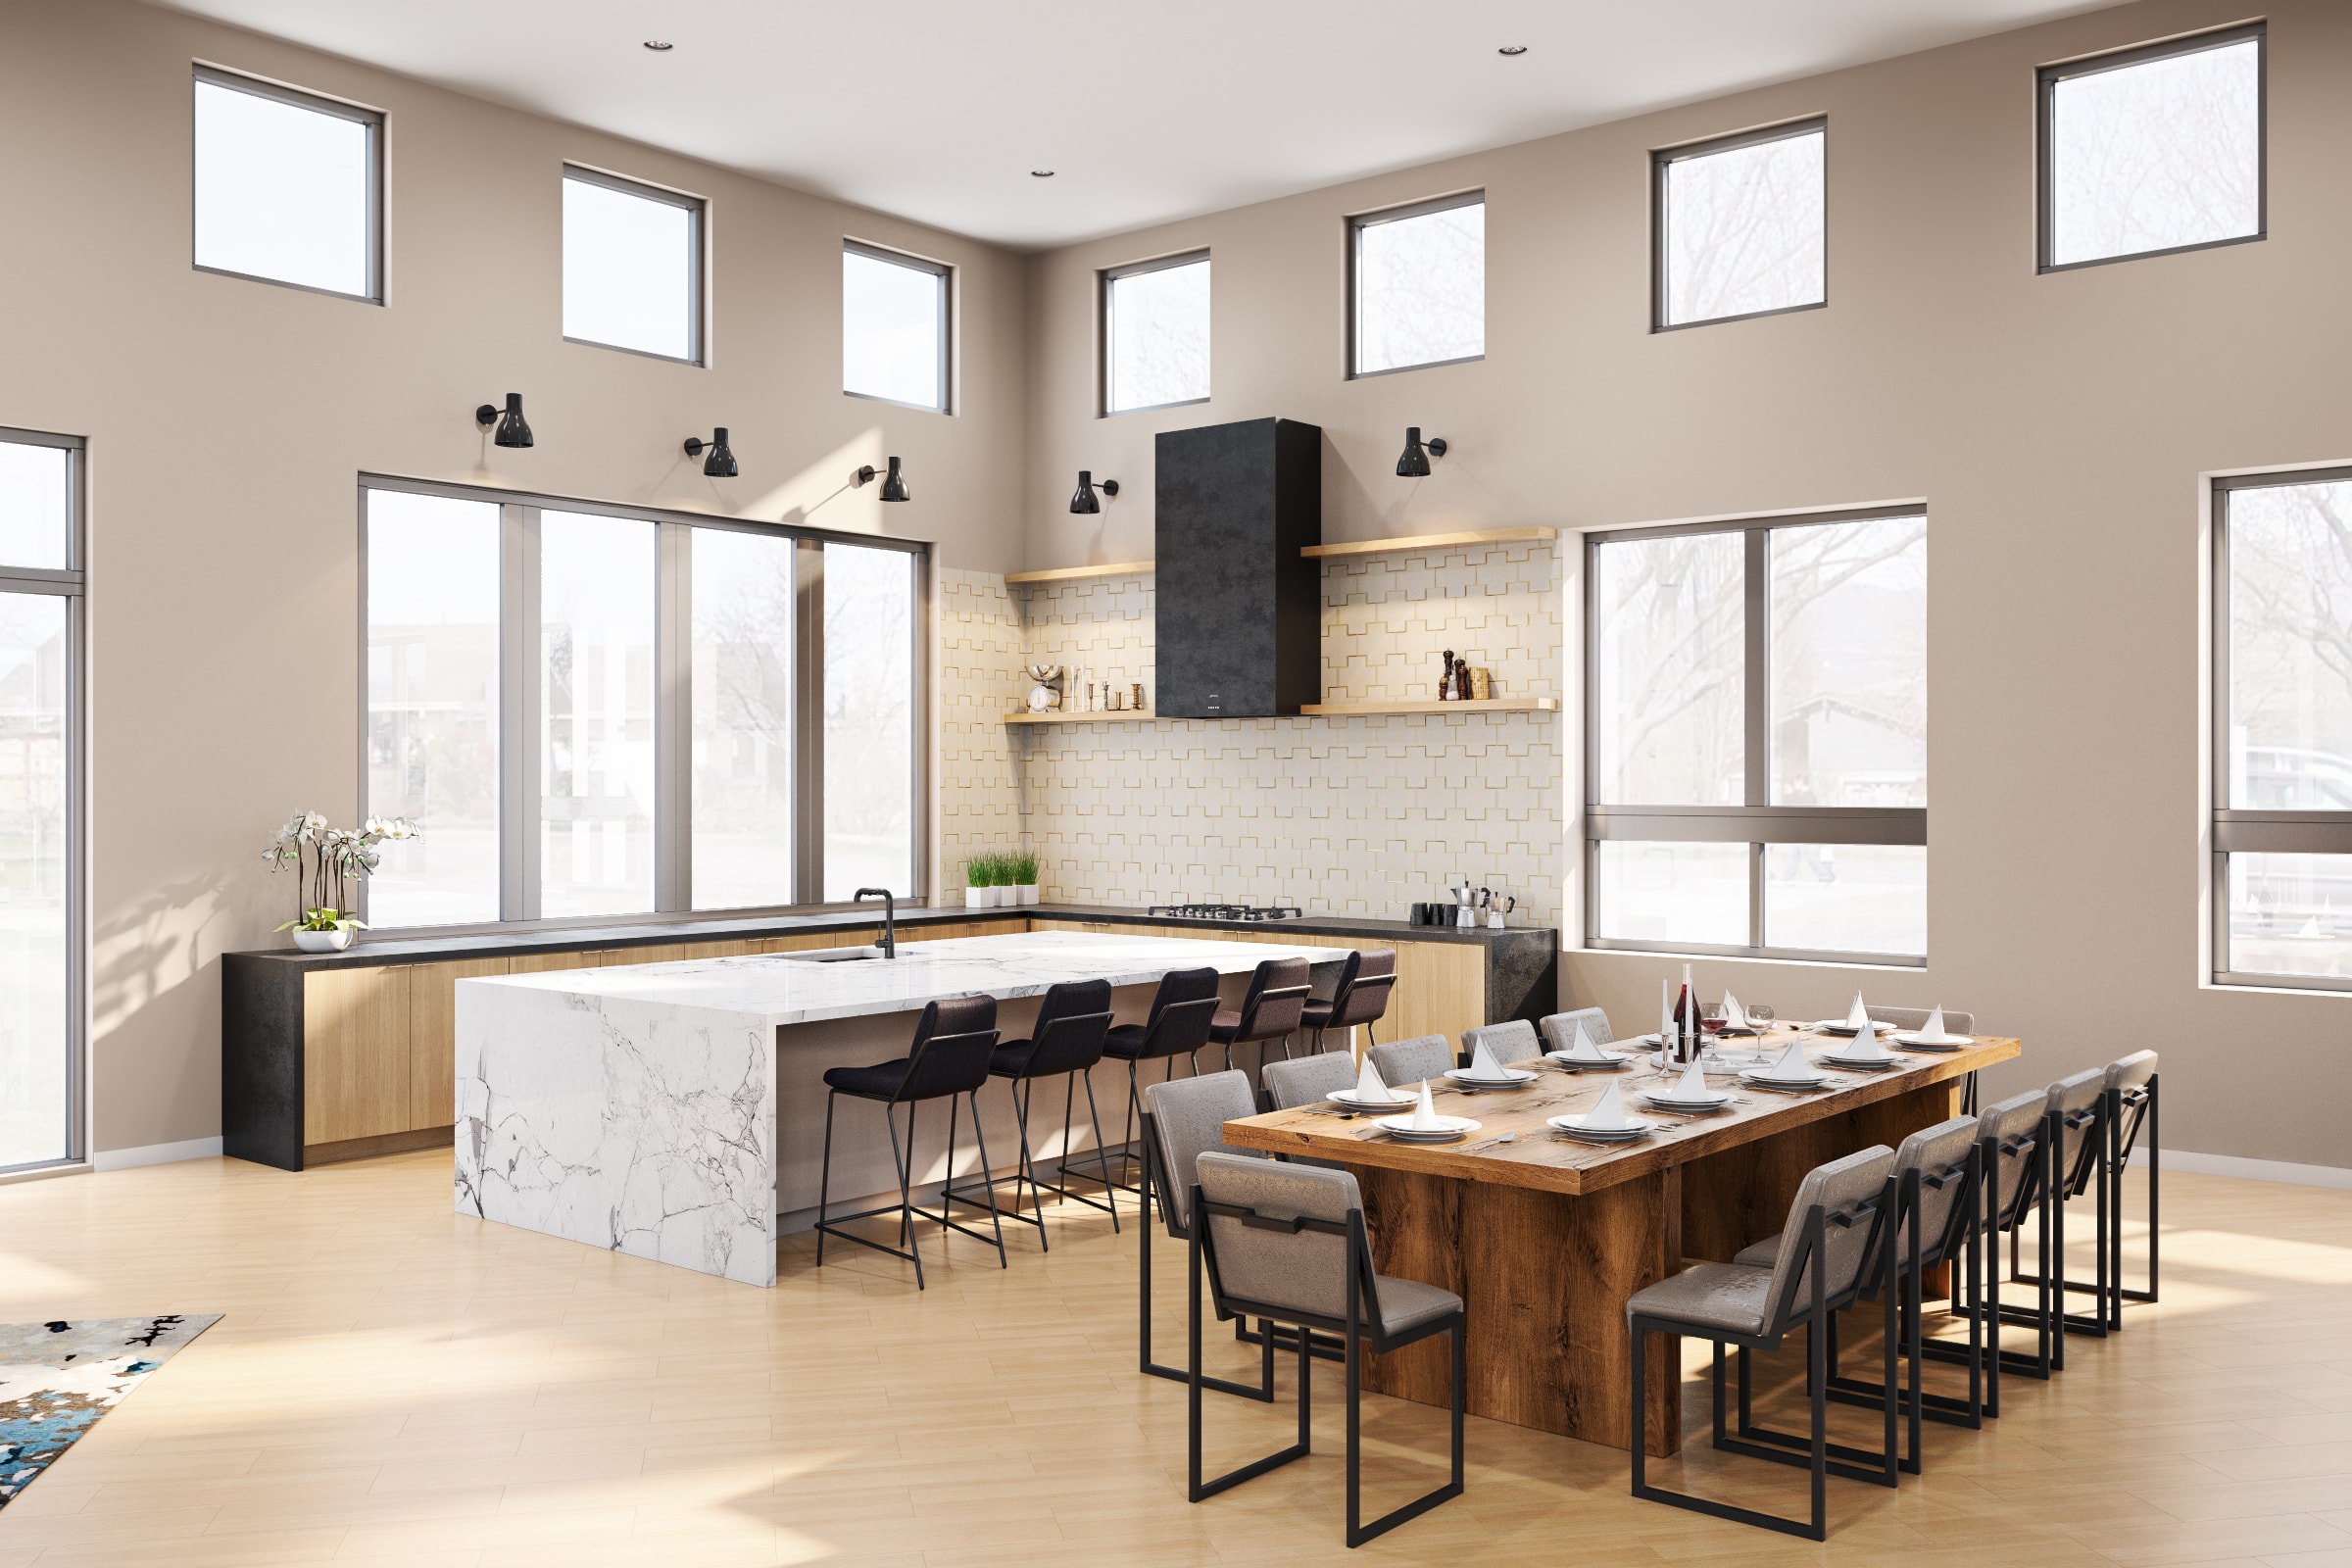 Interior of large, open, shared kitchen area with dining table and countertop seating